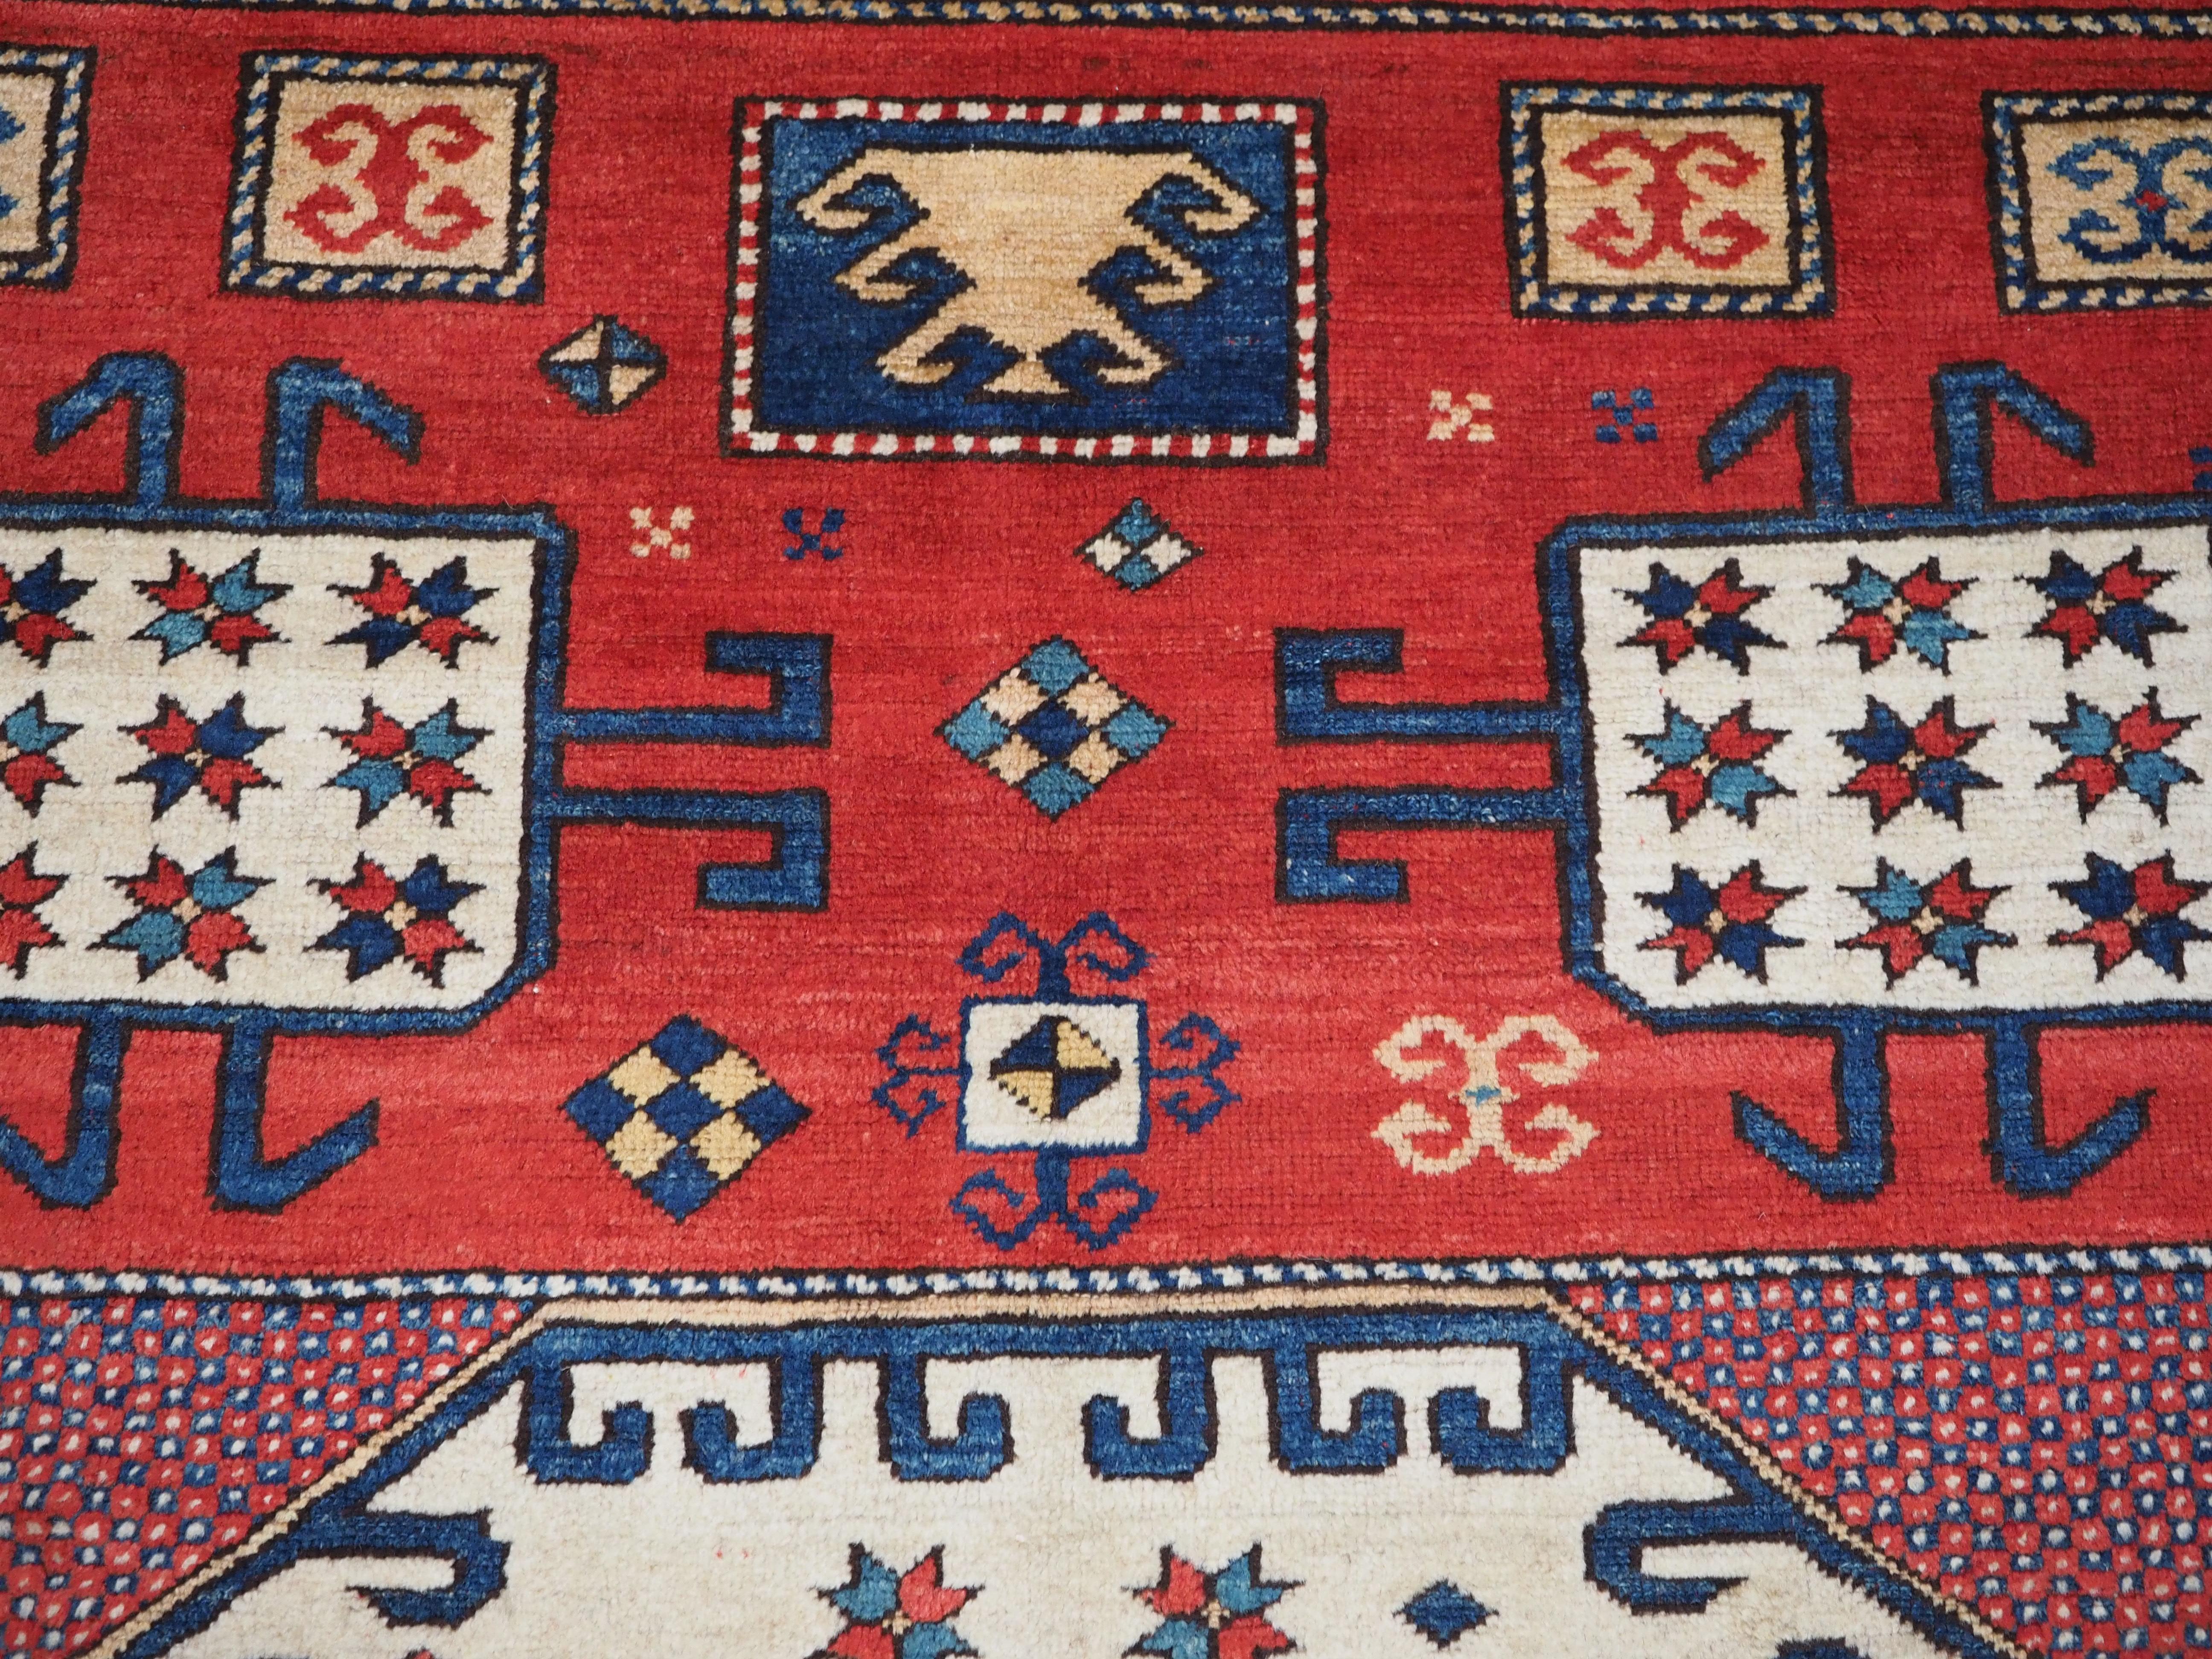 Caucasian Karachov Kazak style rug of classic design on a red ground For Sale 4